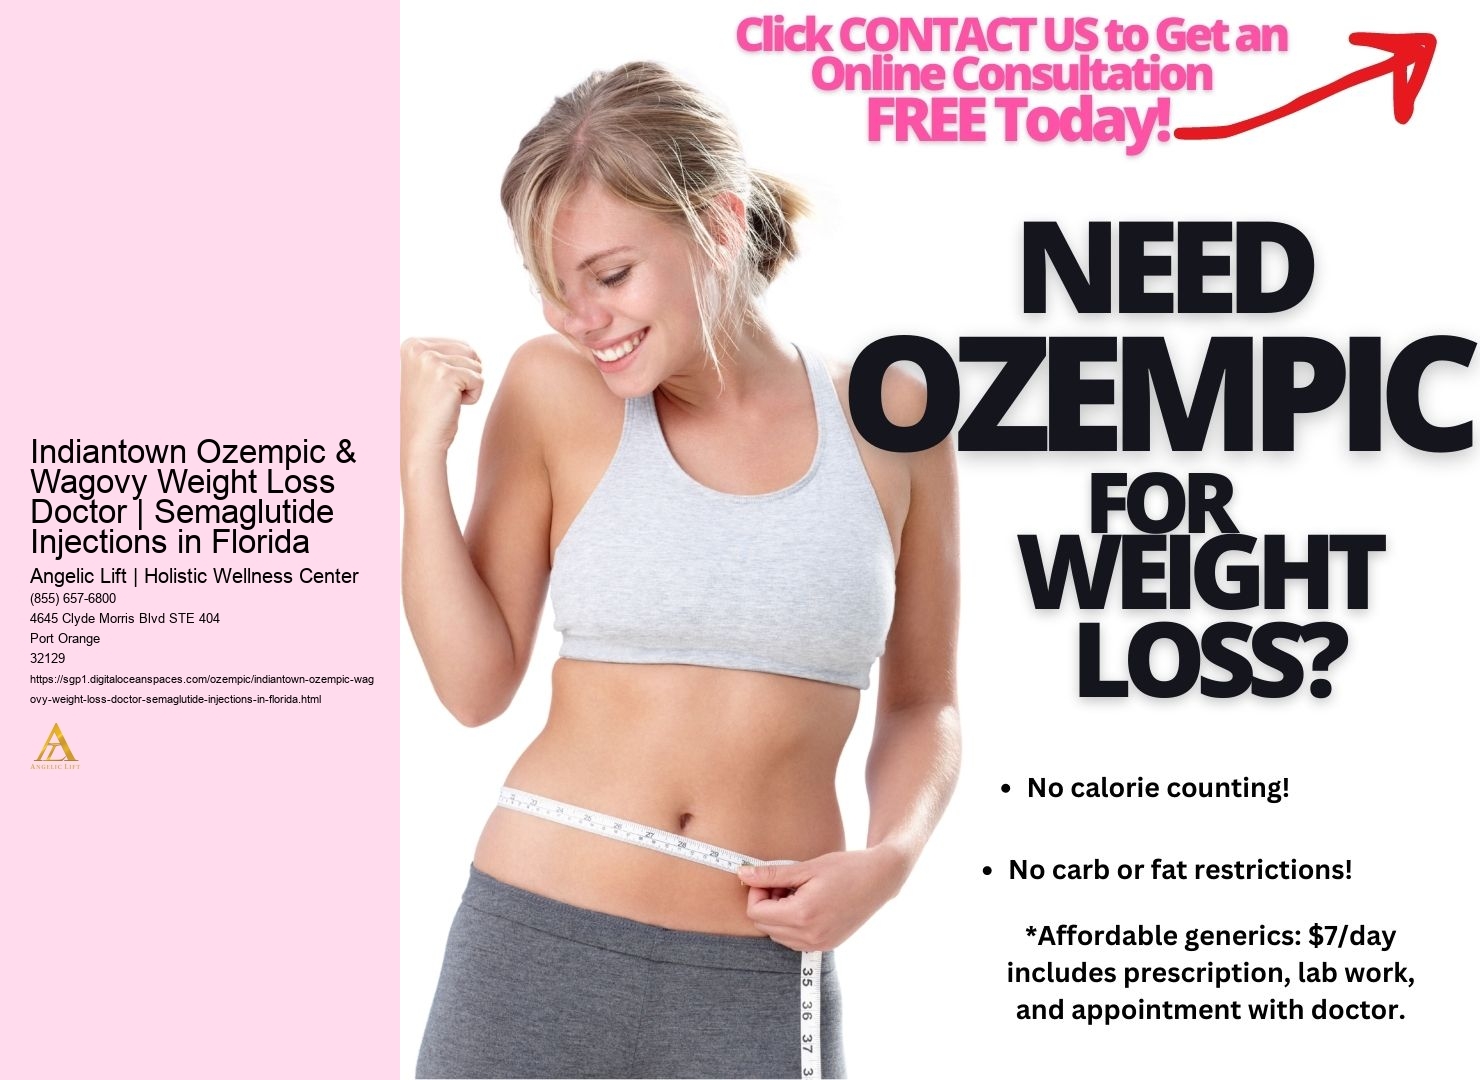 Indiantown Ozempic & Wagovy Weight Loss Doctor | Semaglutide Injections in Florida